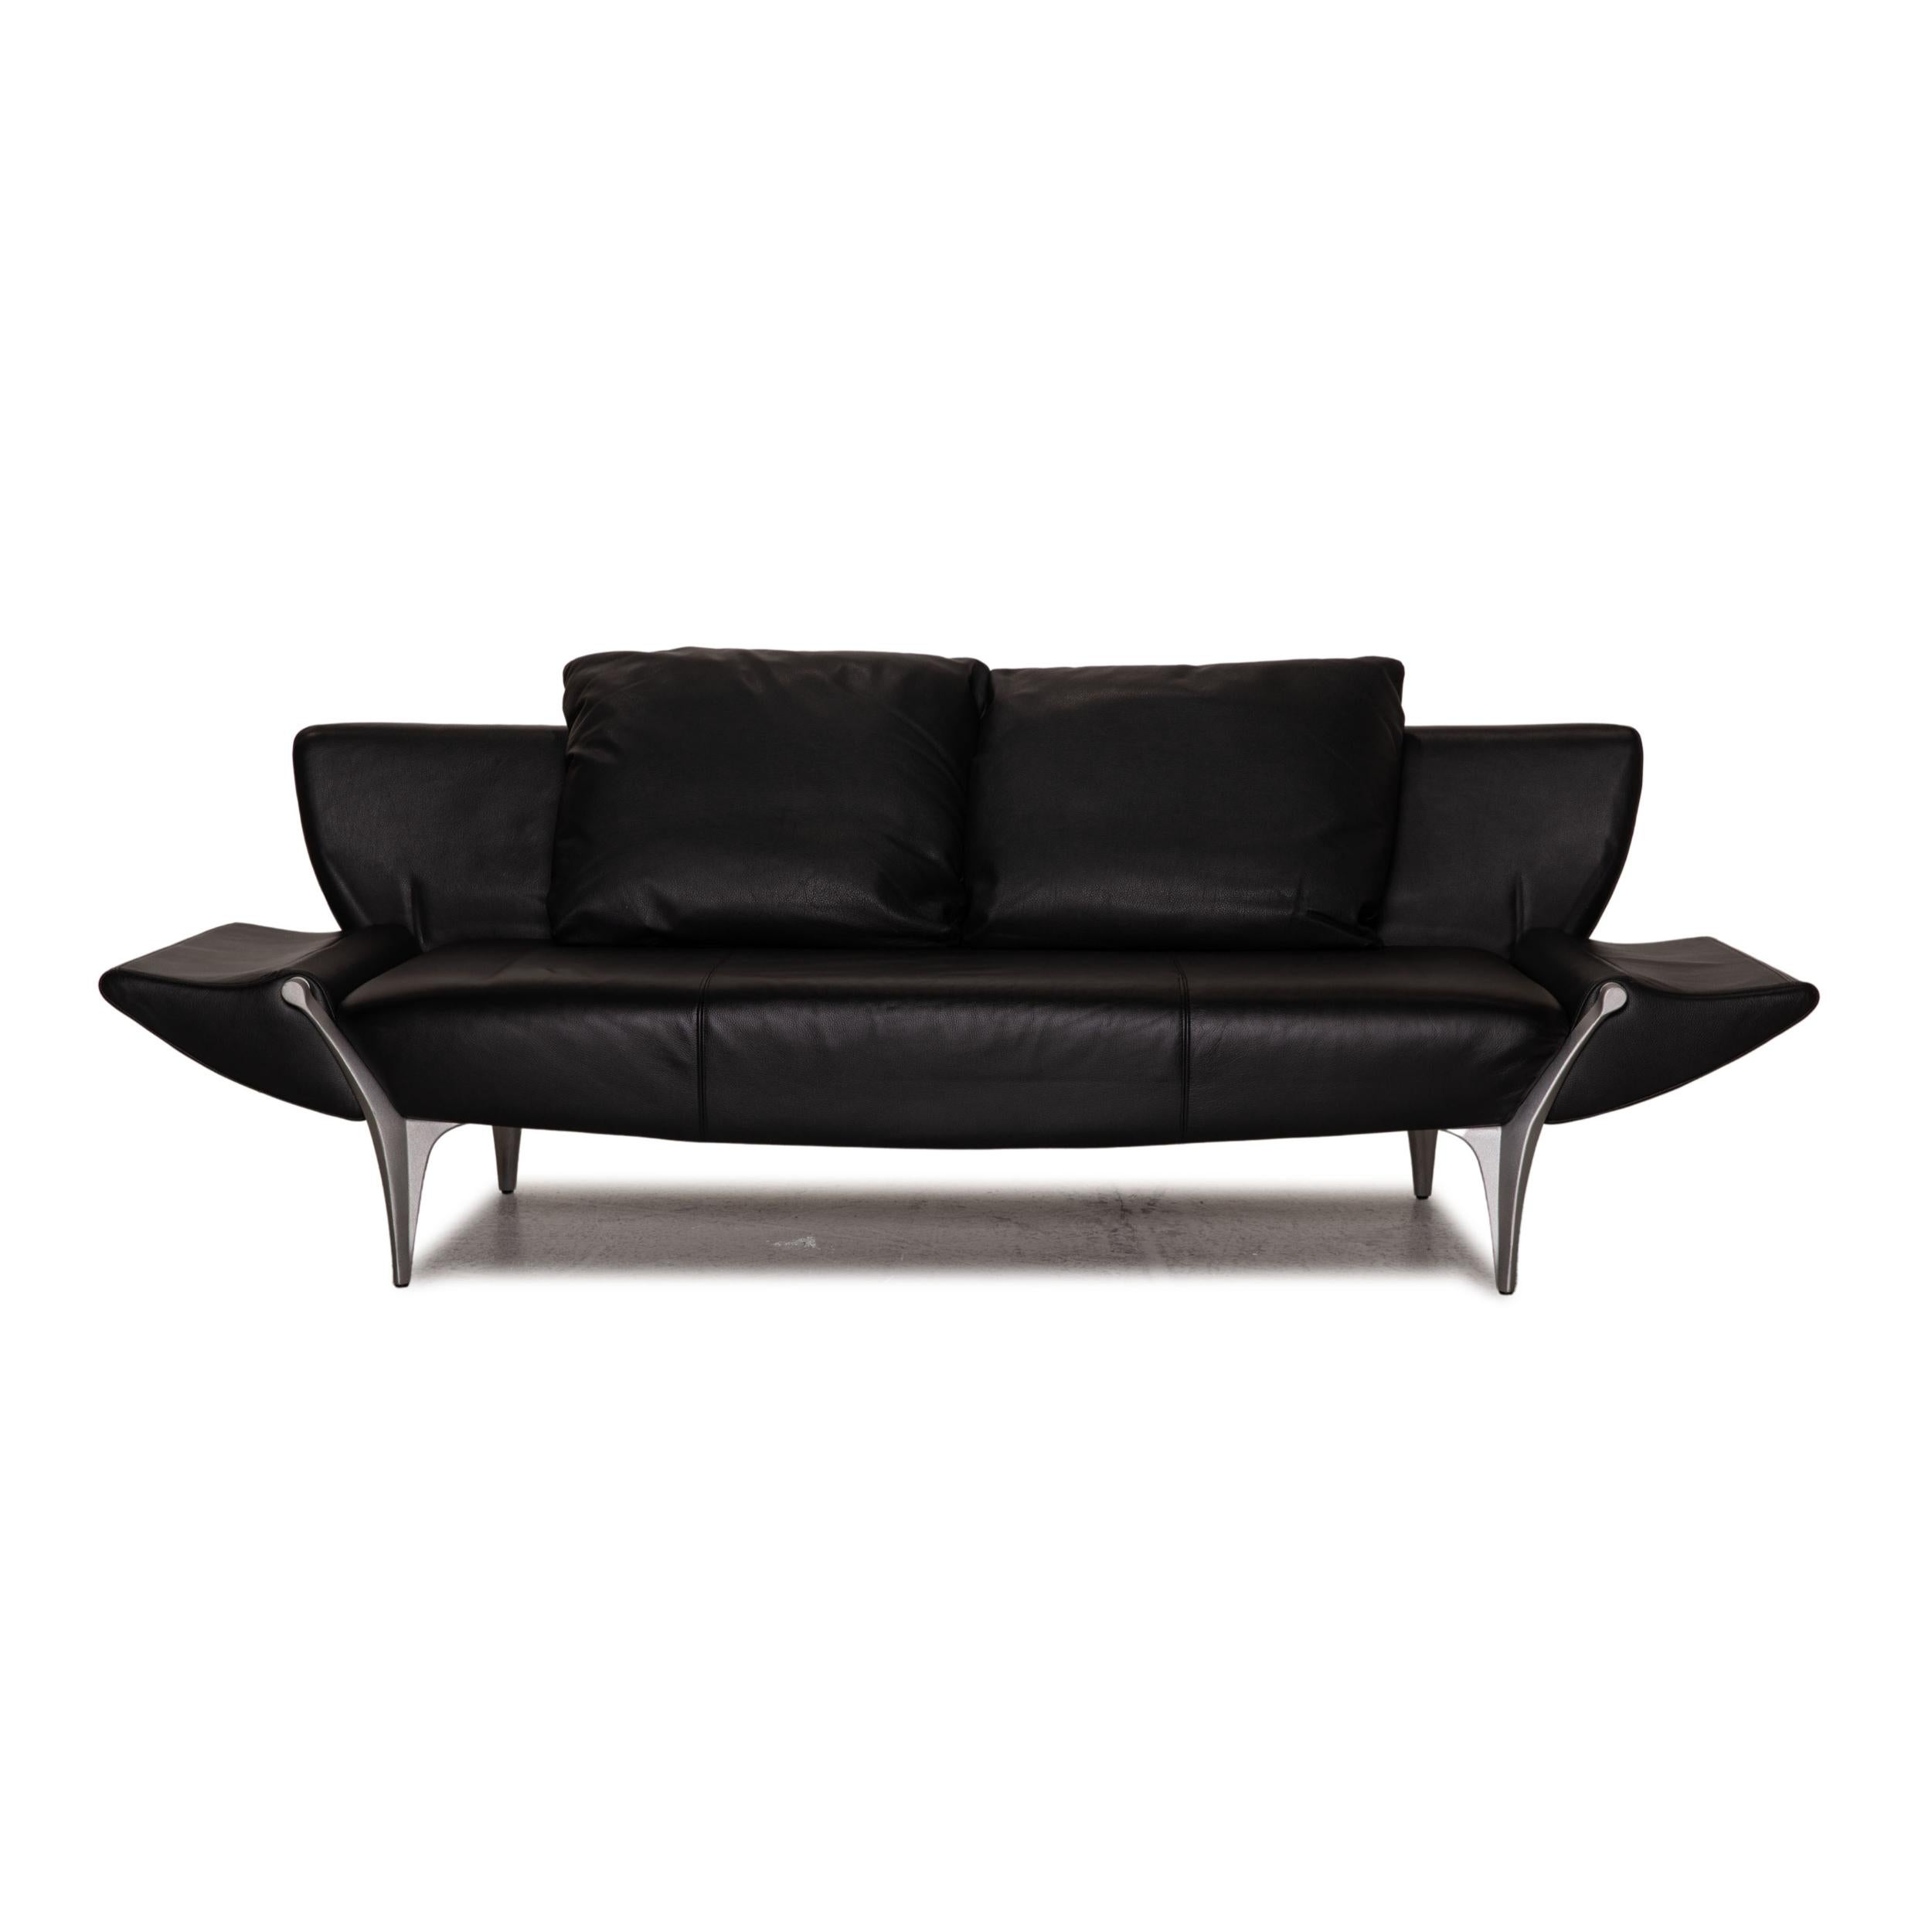 Modern Rolf Benz 1600 Leather Sofa Black Two-Seater Couch Function For Sale